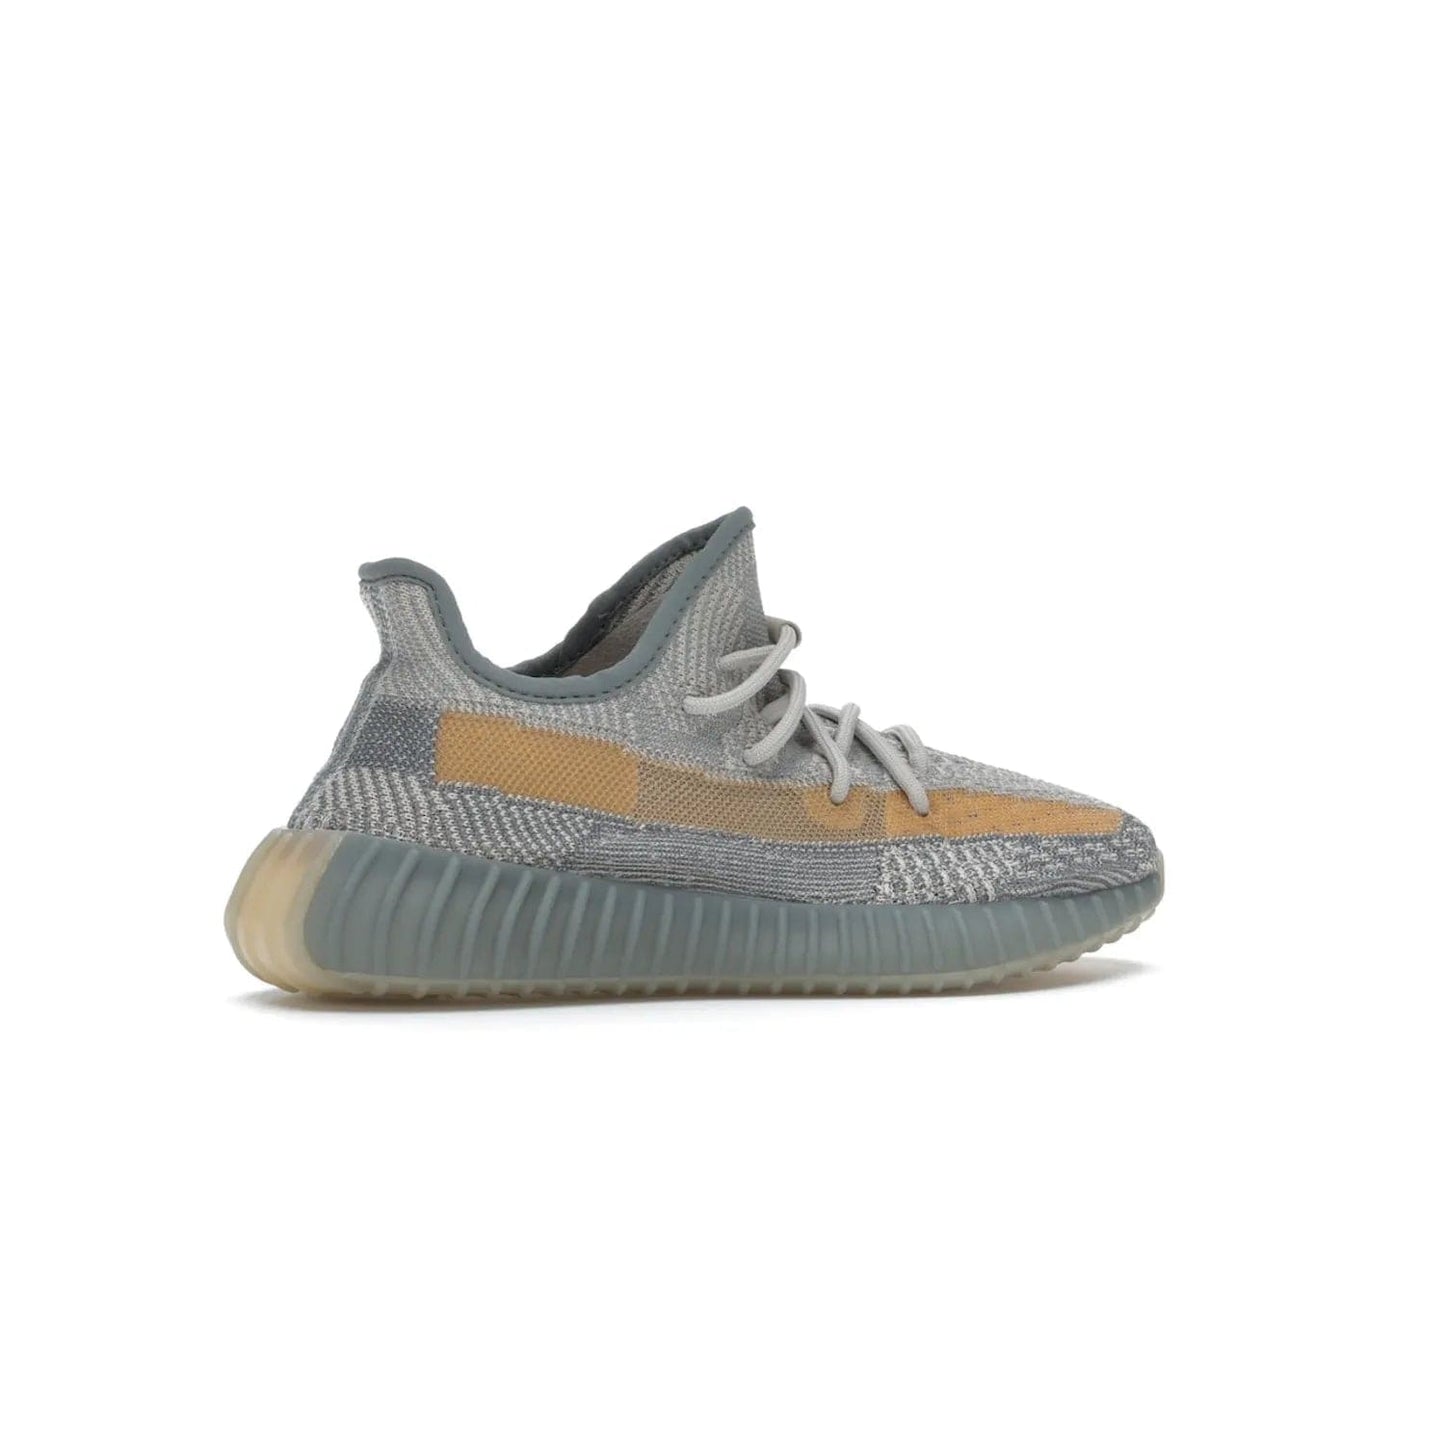 adidas Yeezy Boost 350 V2 Israfil - Image 35 - Only at www.BallersClubKickz.com - The adidas Yeezy Boost 350 V2 Israfil provides a unique style with a triple colorway and multi-colored threads. Featuring BOOST cushioning in a translucent midsole, this must-have sneaker drops in August 2020.